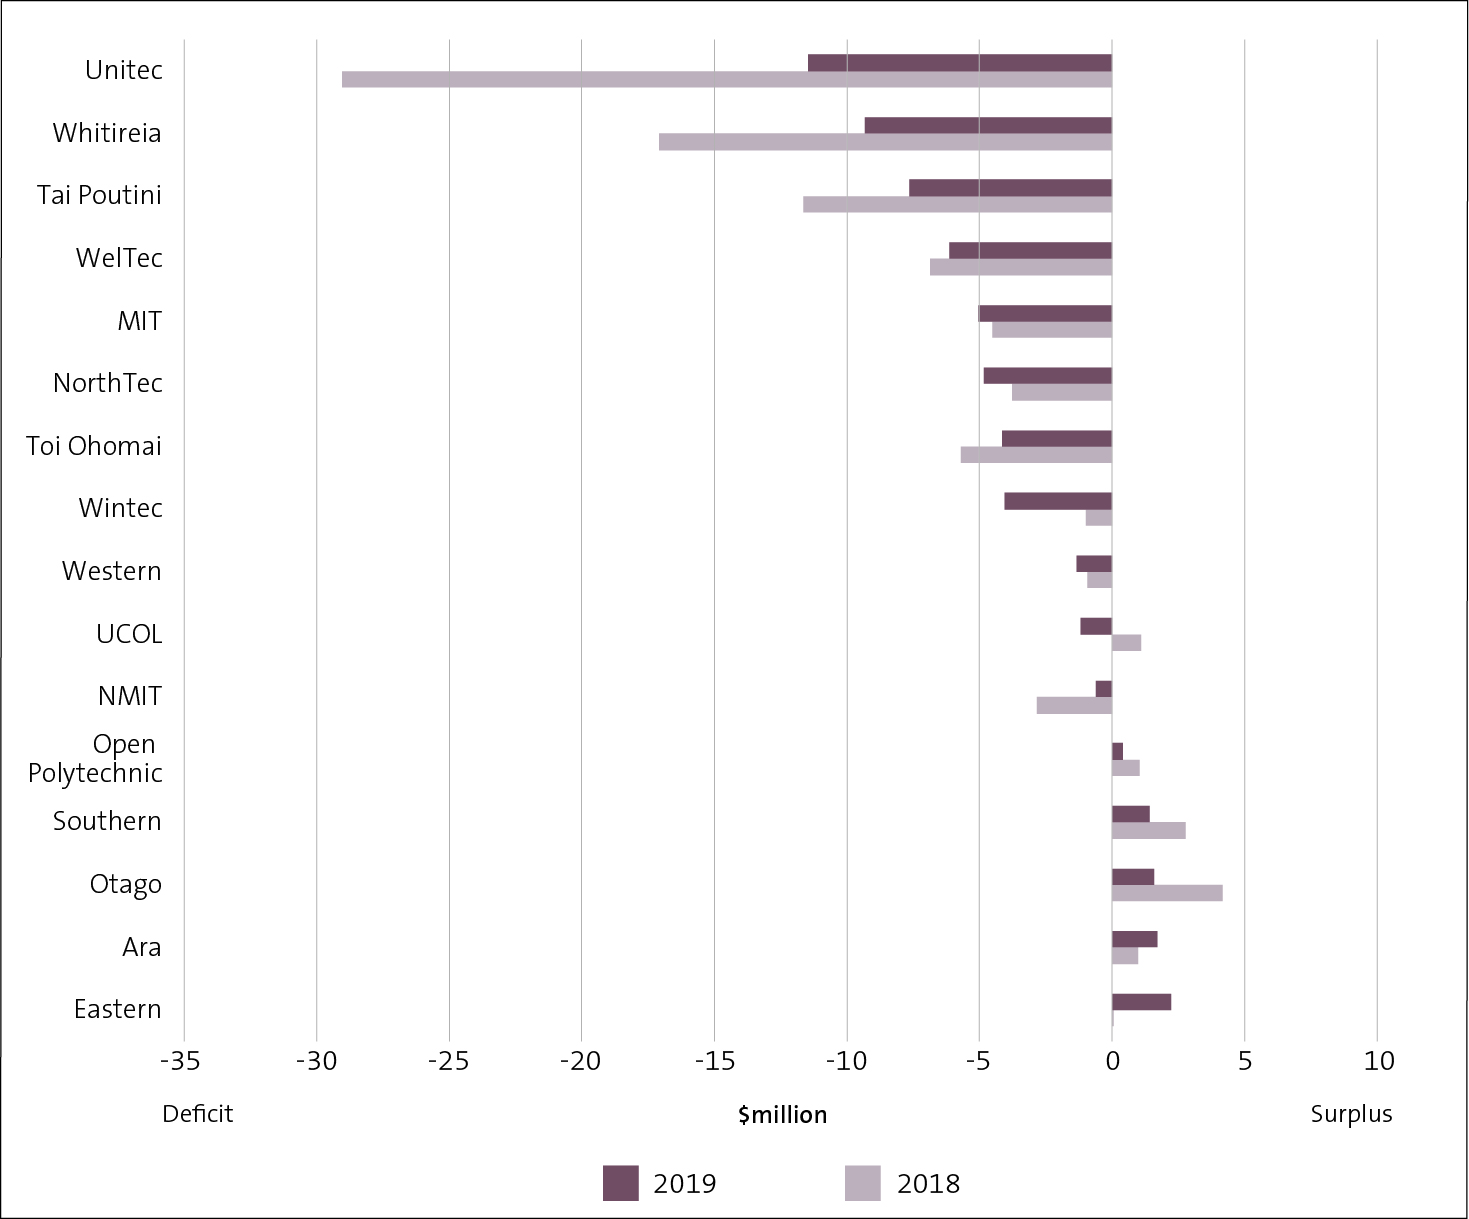 Figure 11 - Surpluses and deficits for each institute of technology and polytechnic, 2018 and 2019